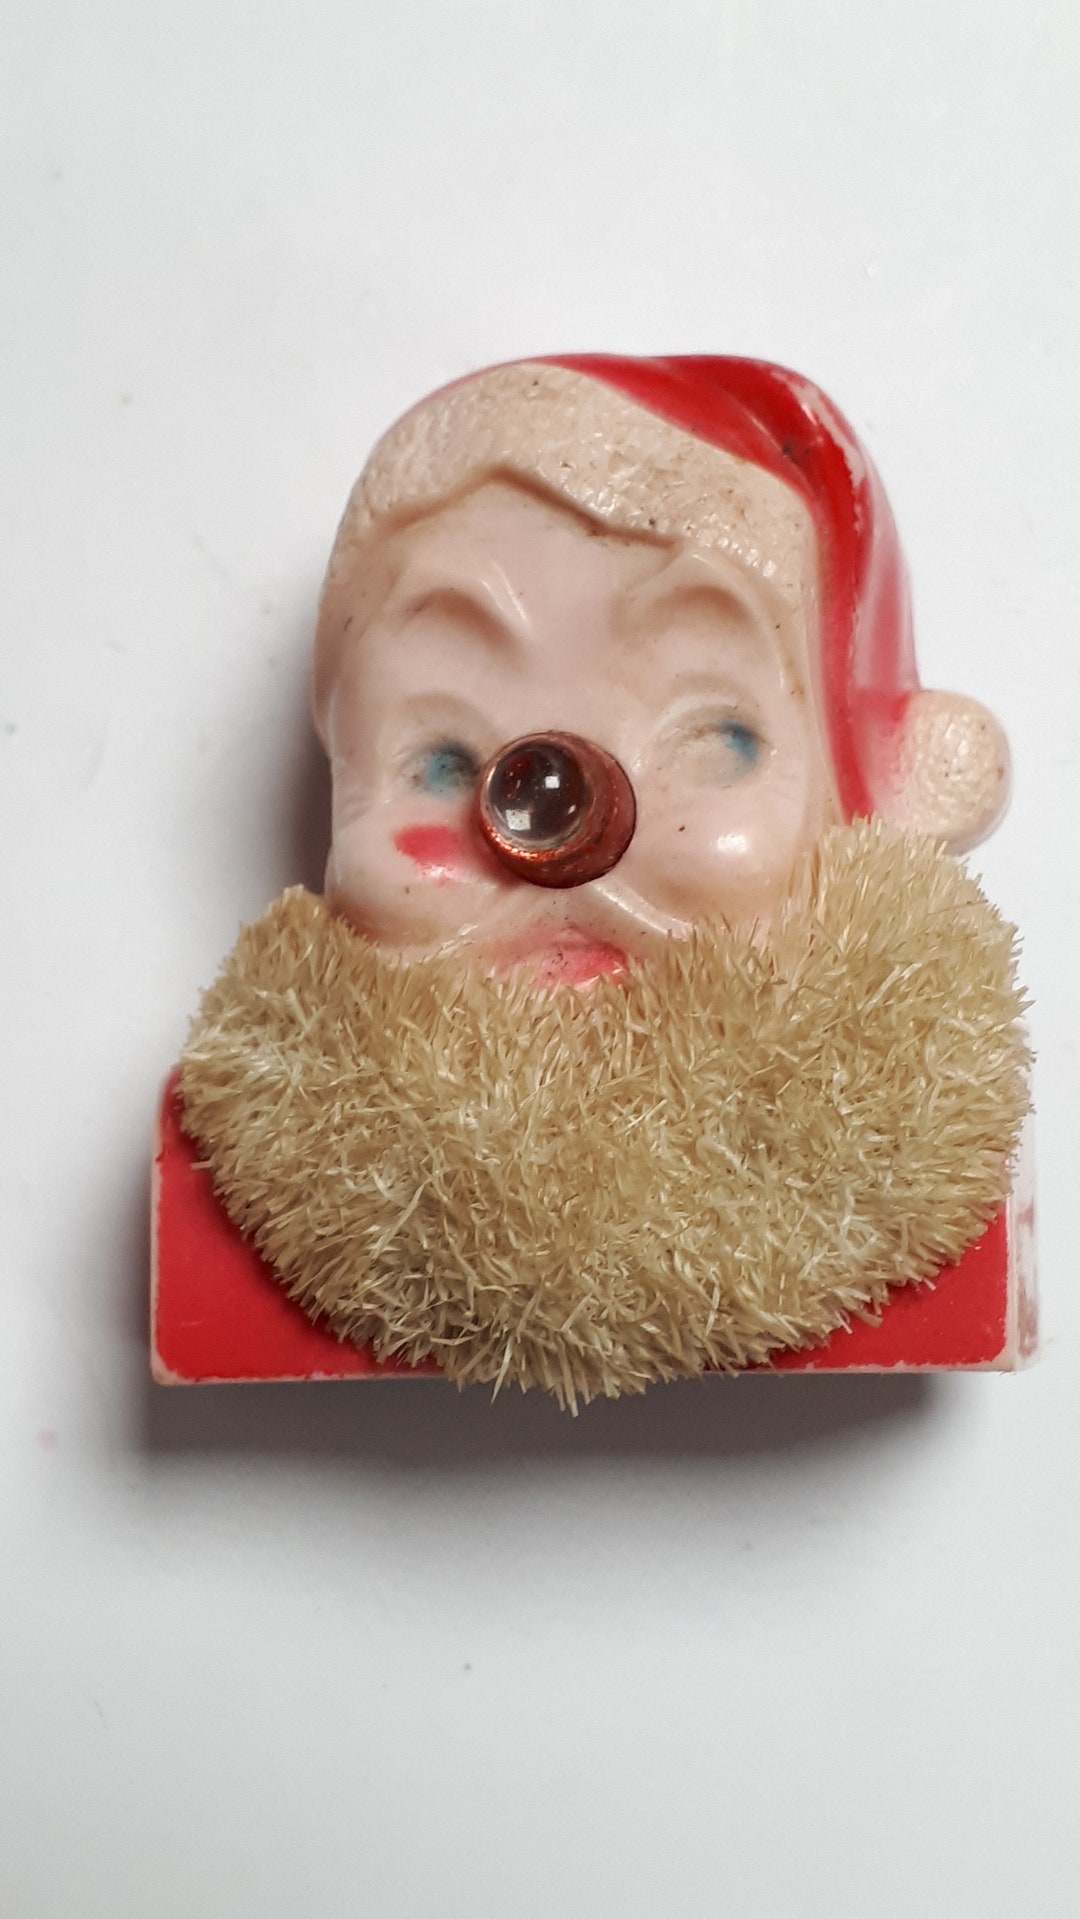 SANTA CLAUS Vintage Brooch in Celluloid, Battery-driven, Red Nose ...